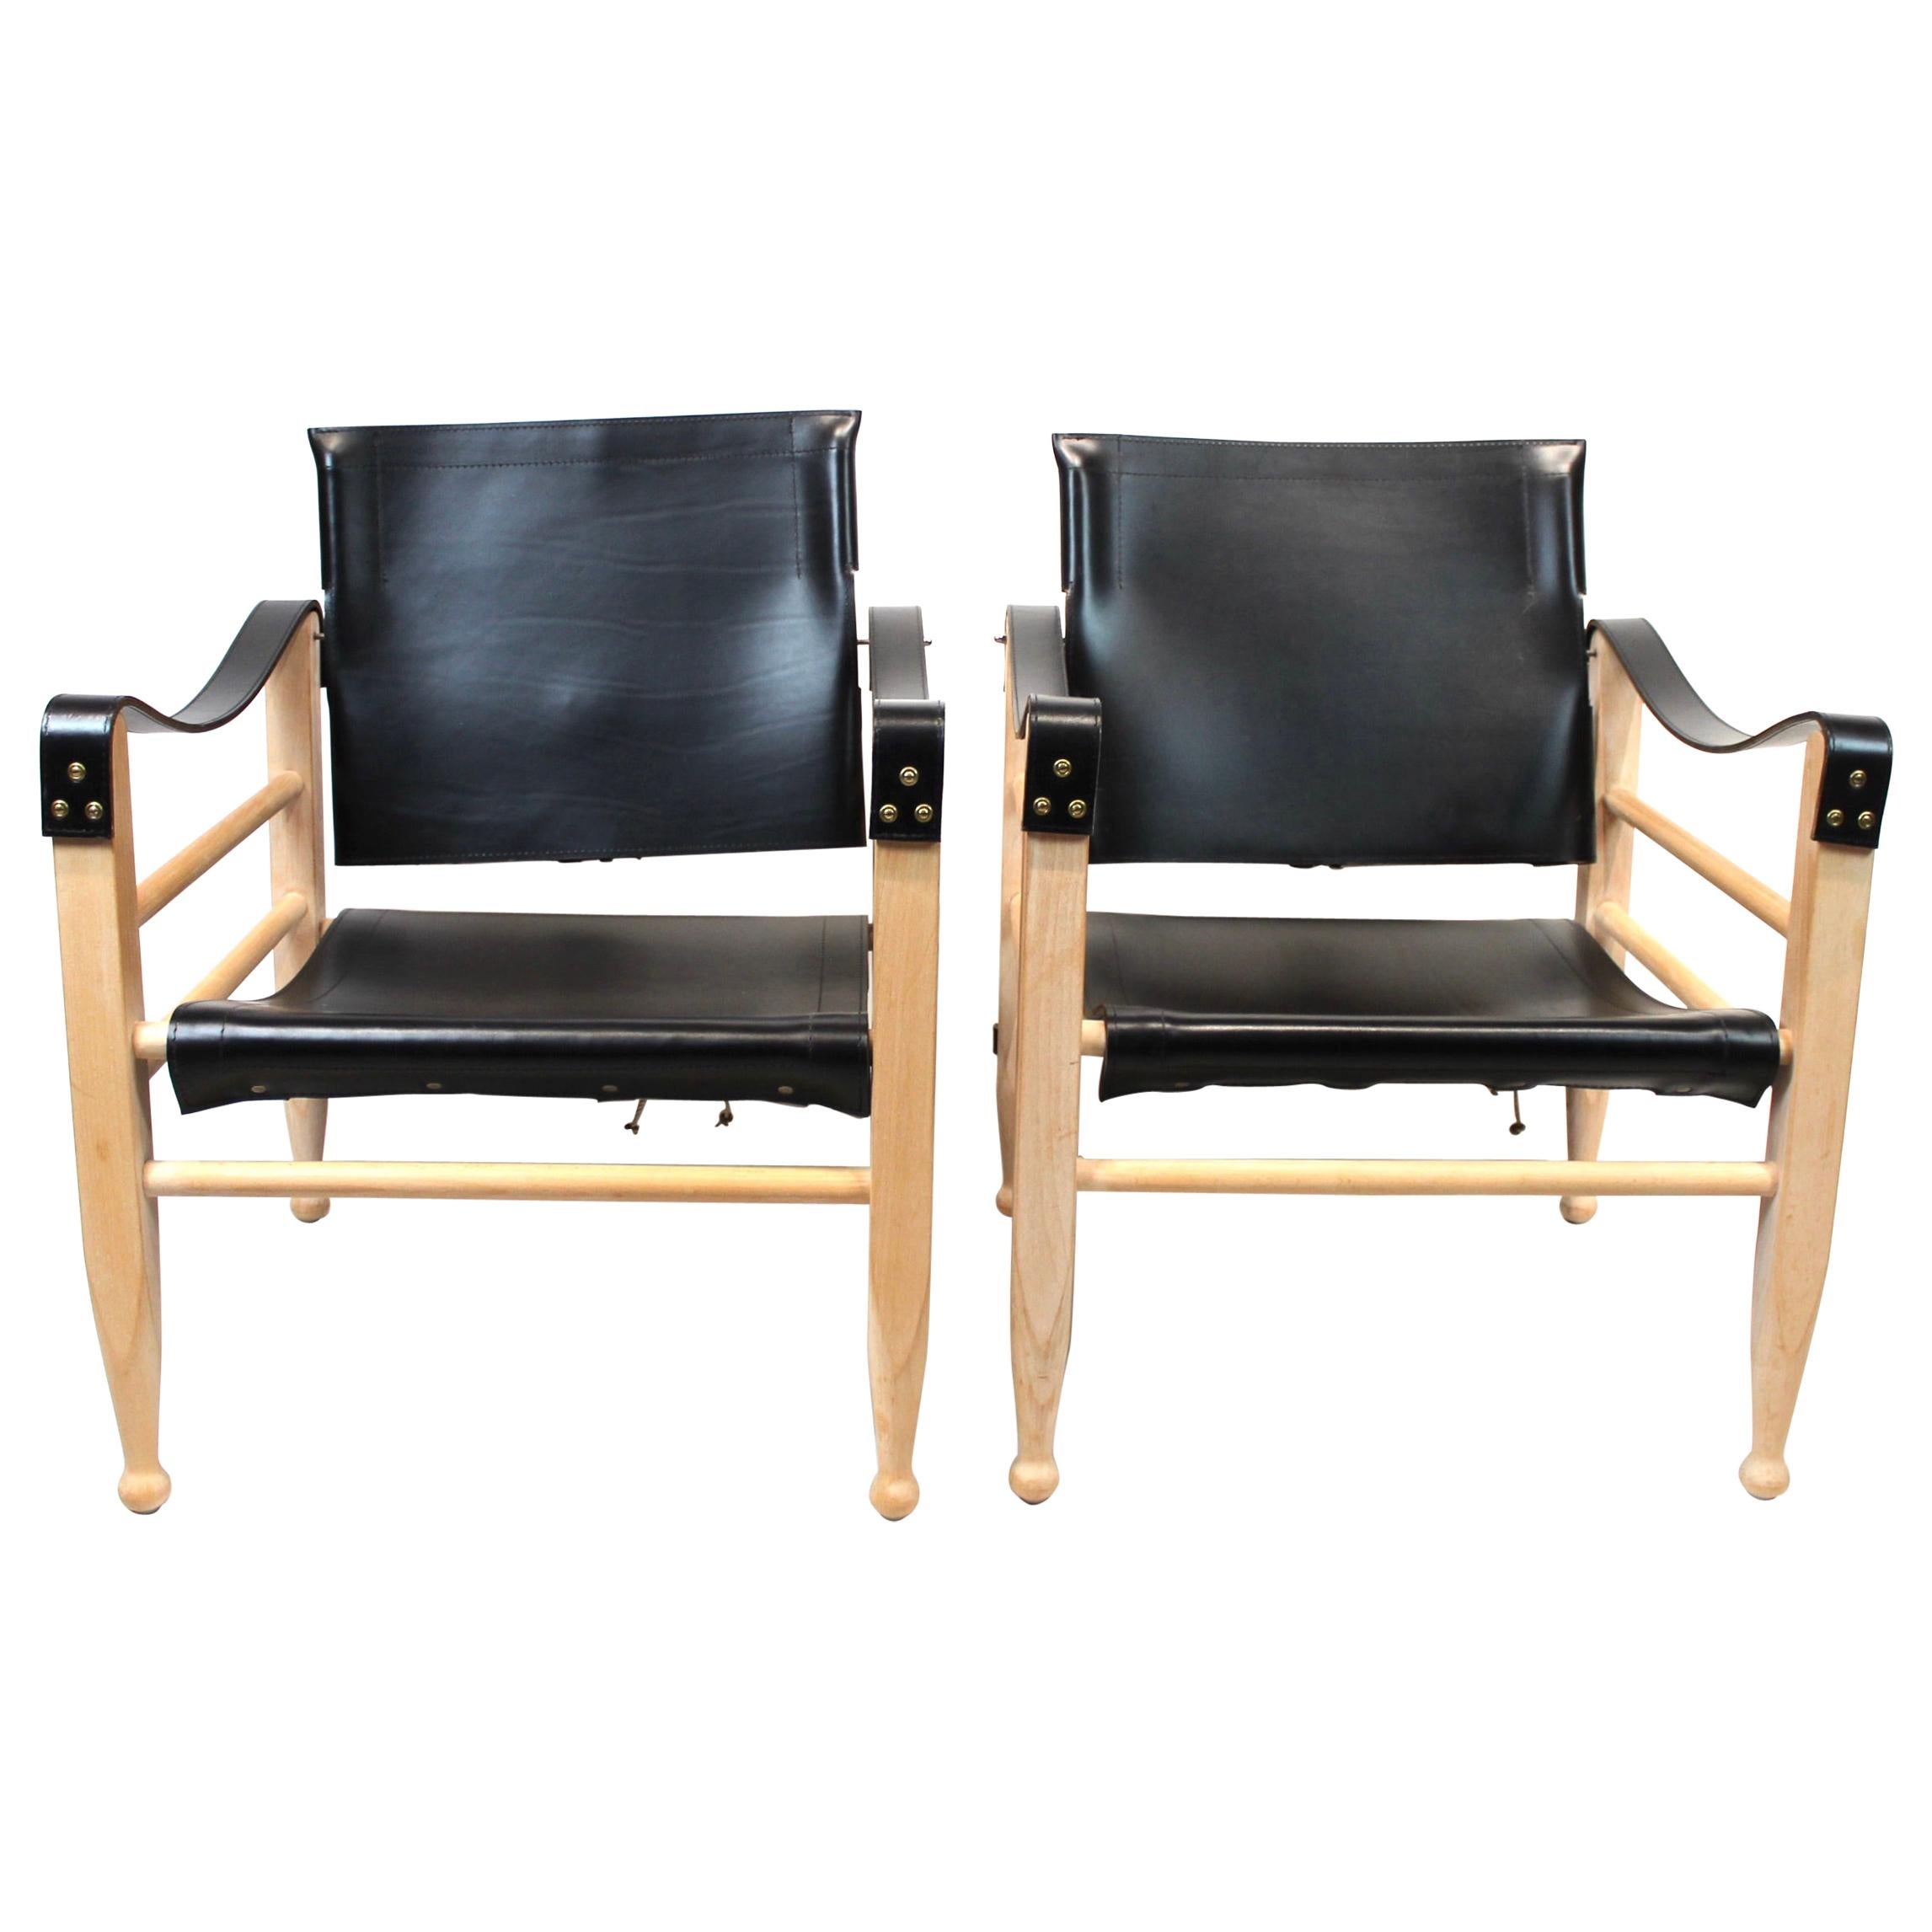 Pair of Safari Chairs by Aage Bruun & Son of Black Leather, 1960s